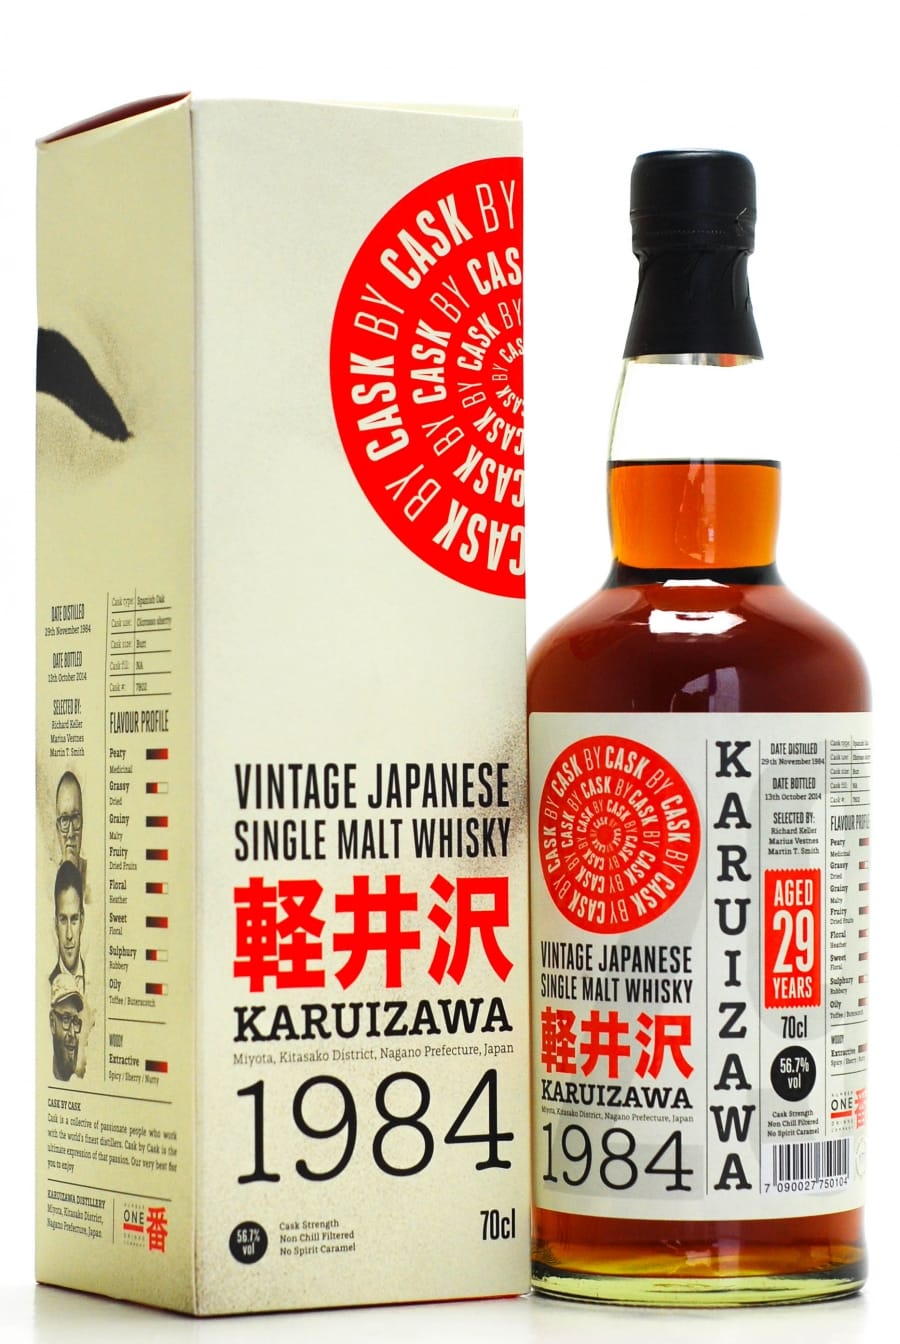 Karuizawa - 29 Years Old Cask By Cask:7802 For Cask Norway AS and Cask of Sweden 56.7% 1984 In Original Container